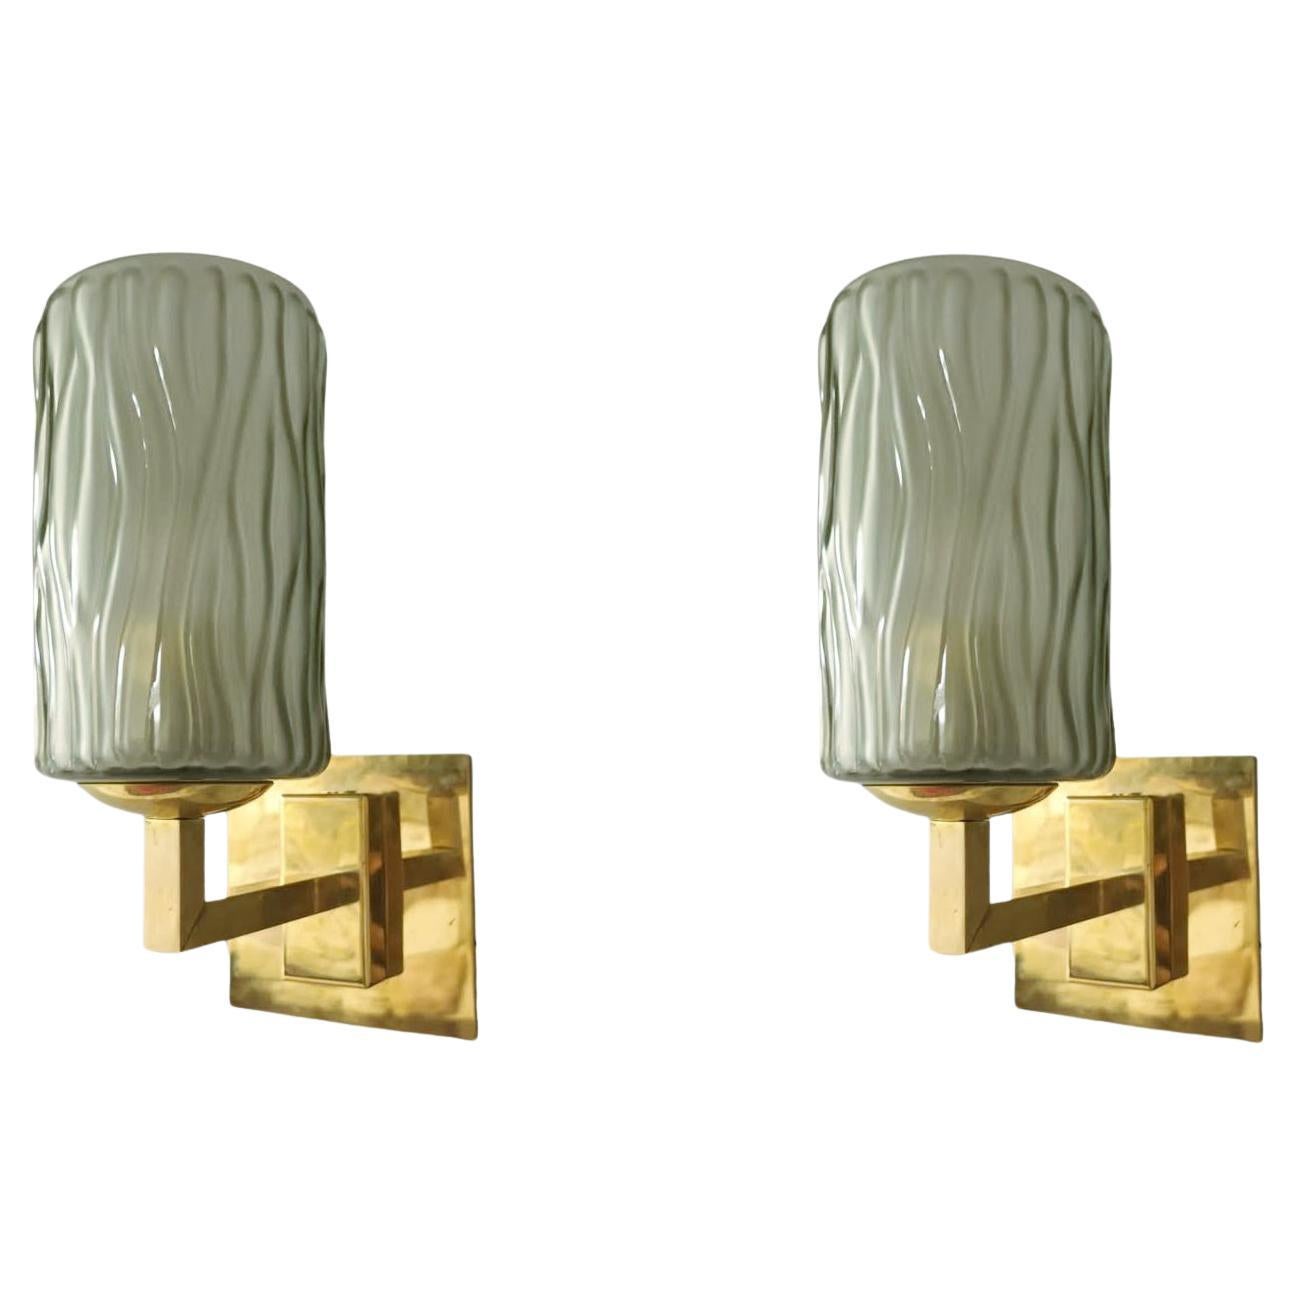 Pair of Smoky Textured Sconces by Barovier e Toso